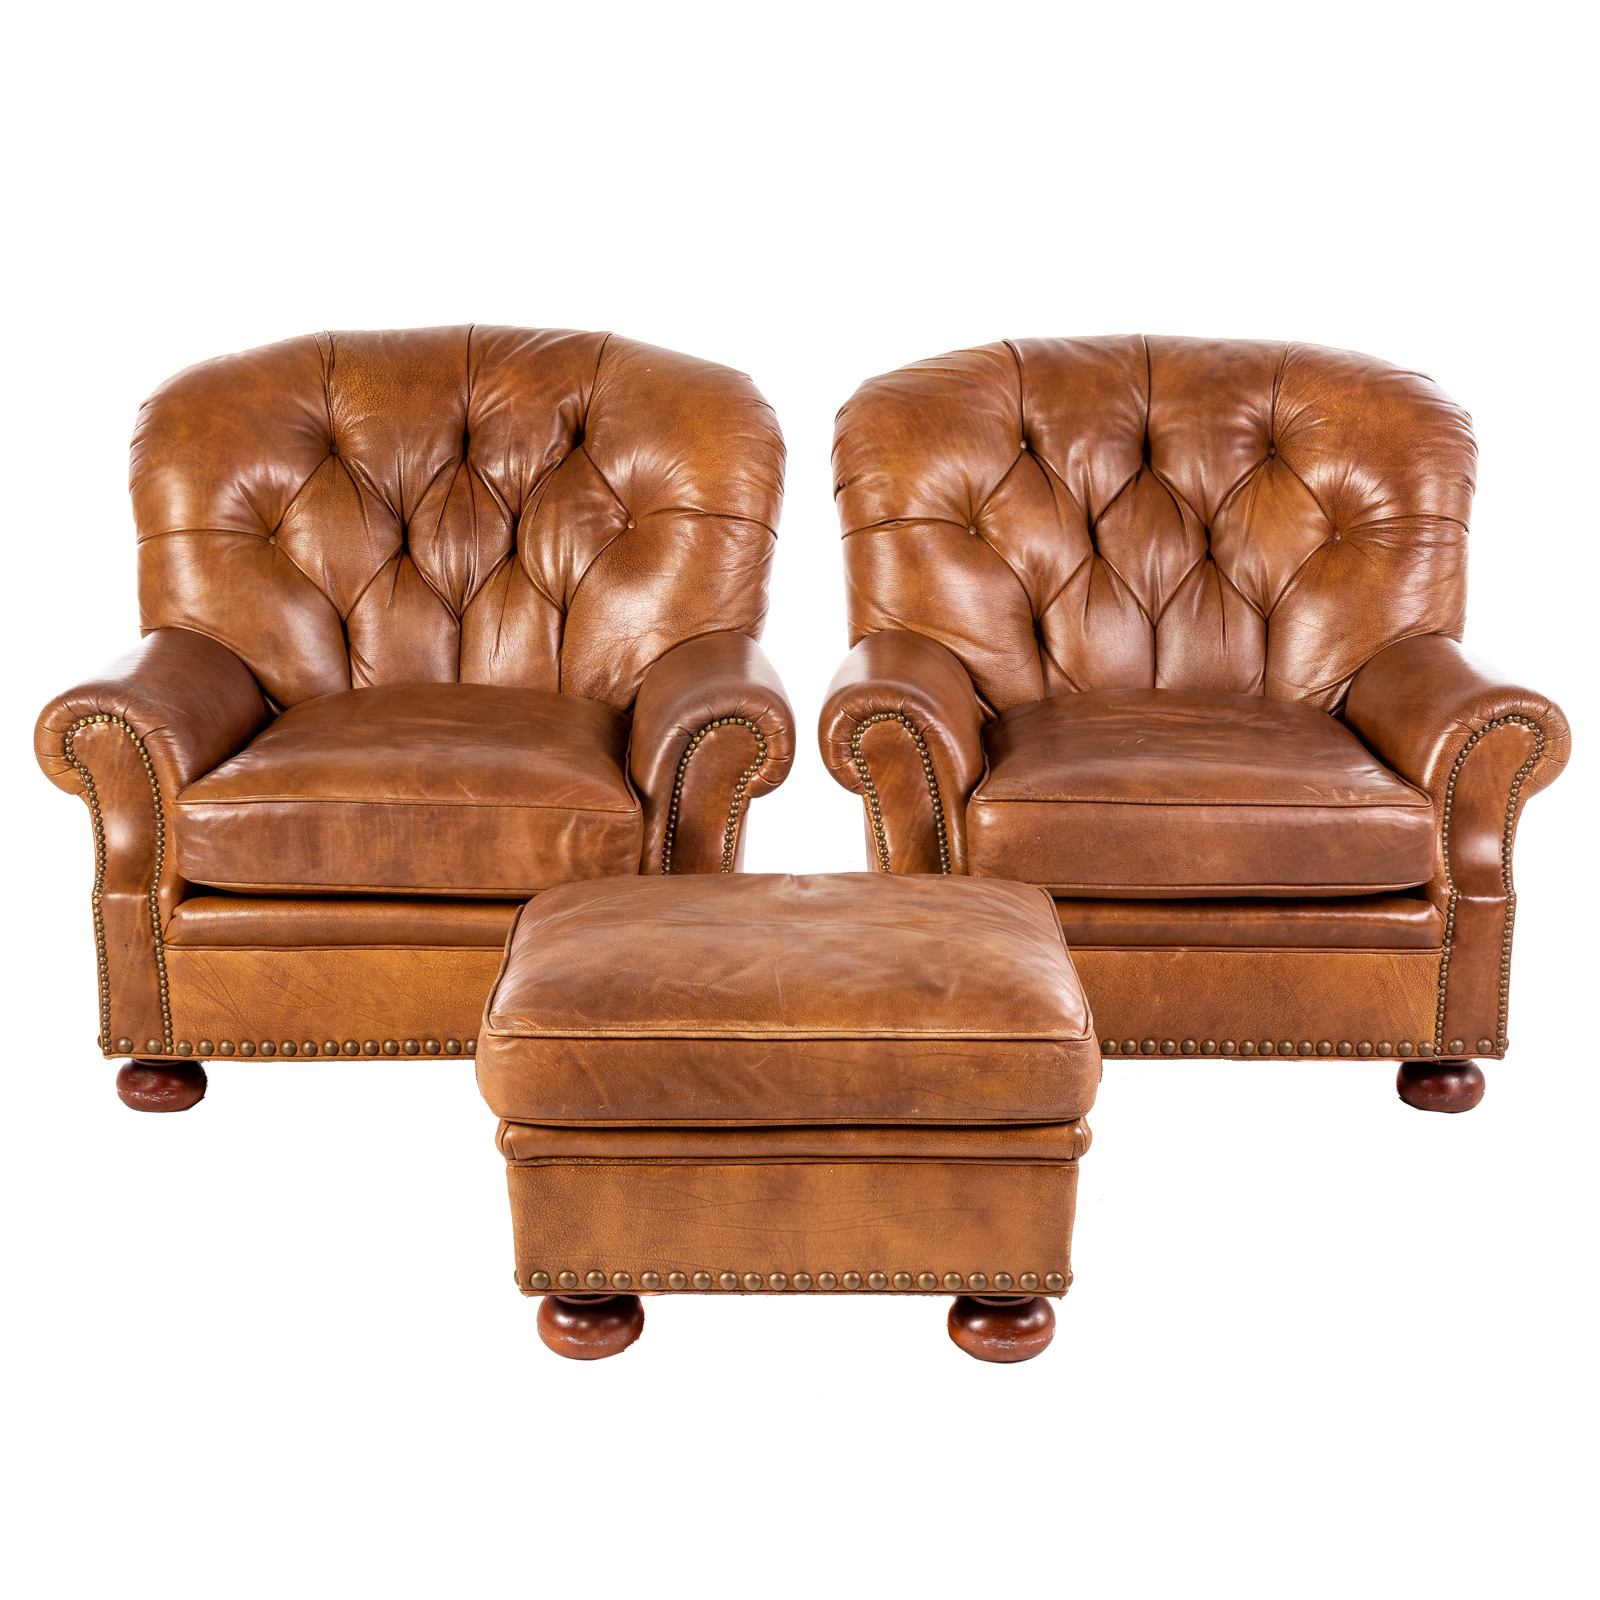 A PAIR OF TUFTED LEATHER ARM CHAIRS